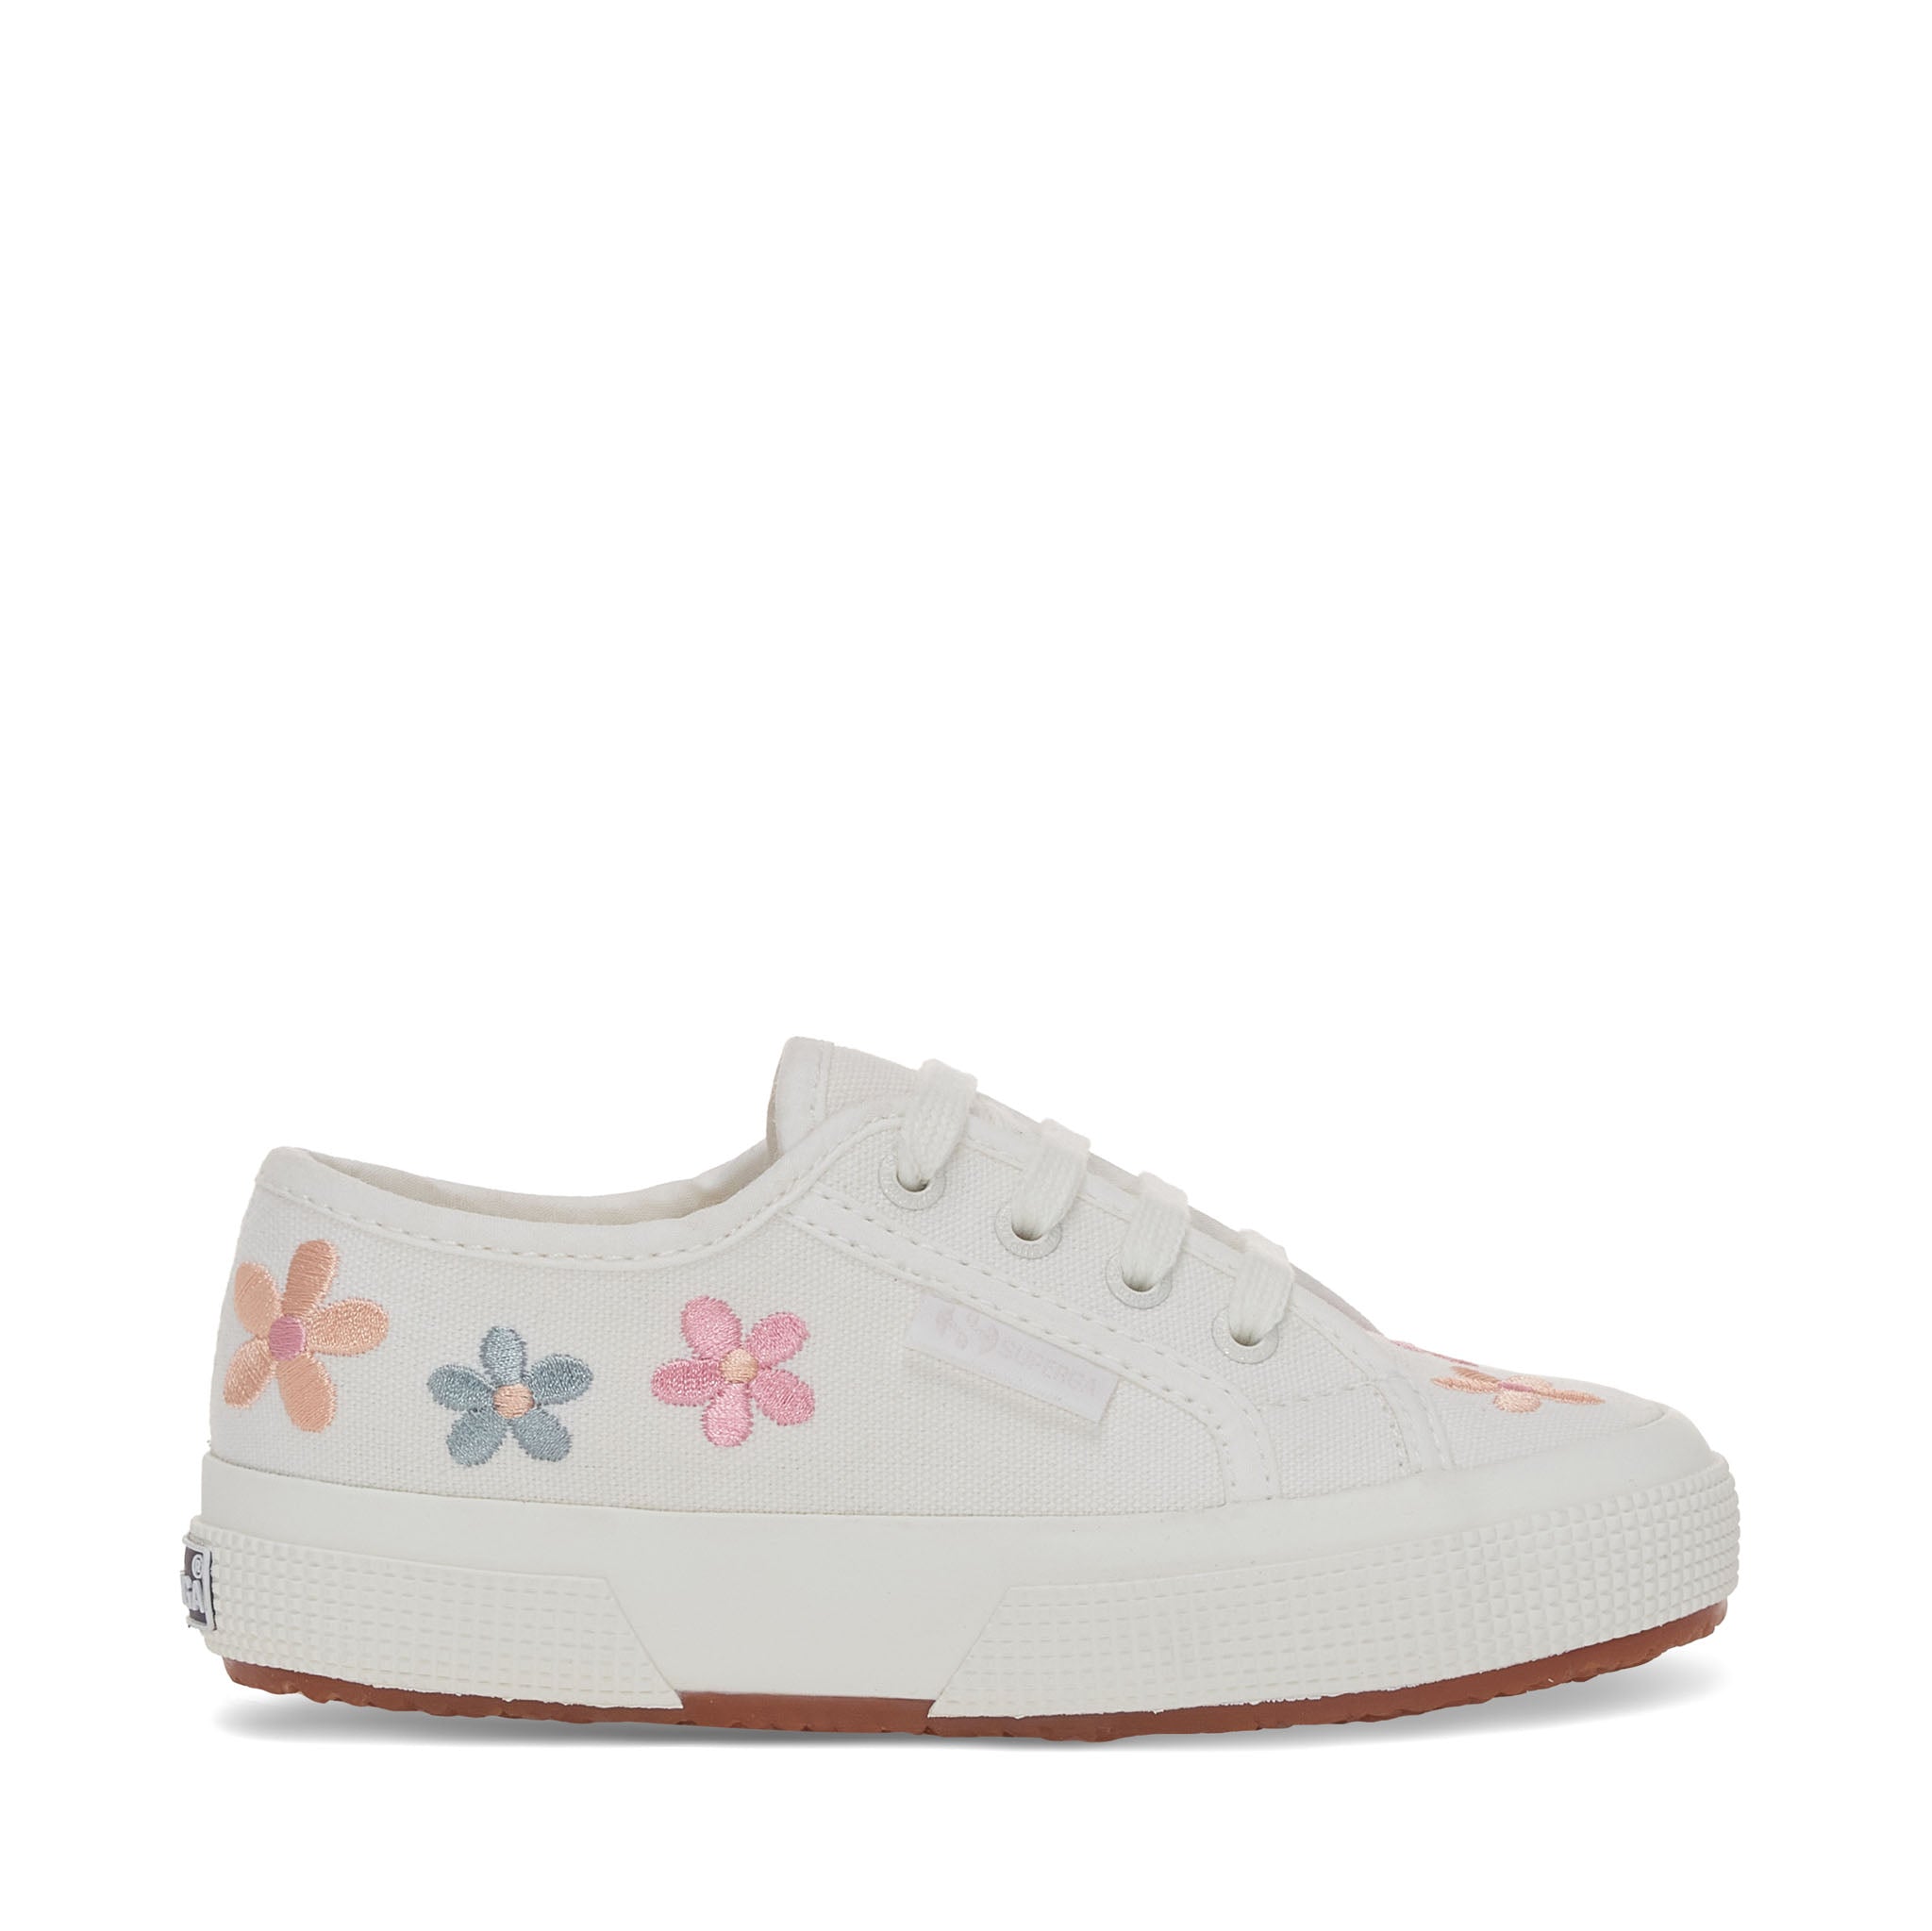 Ruilhandel scherm Waterig Superga - 2750 Kids Embroidery Flowers Sneakers - White Floral – Superga US